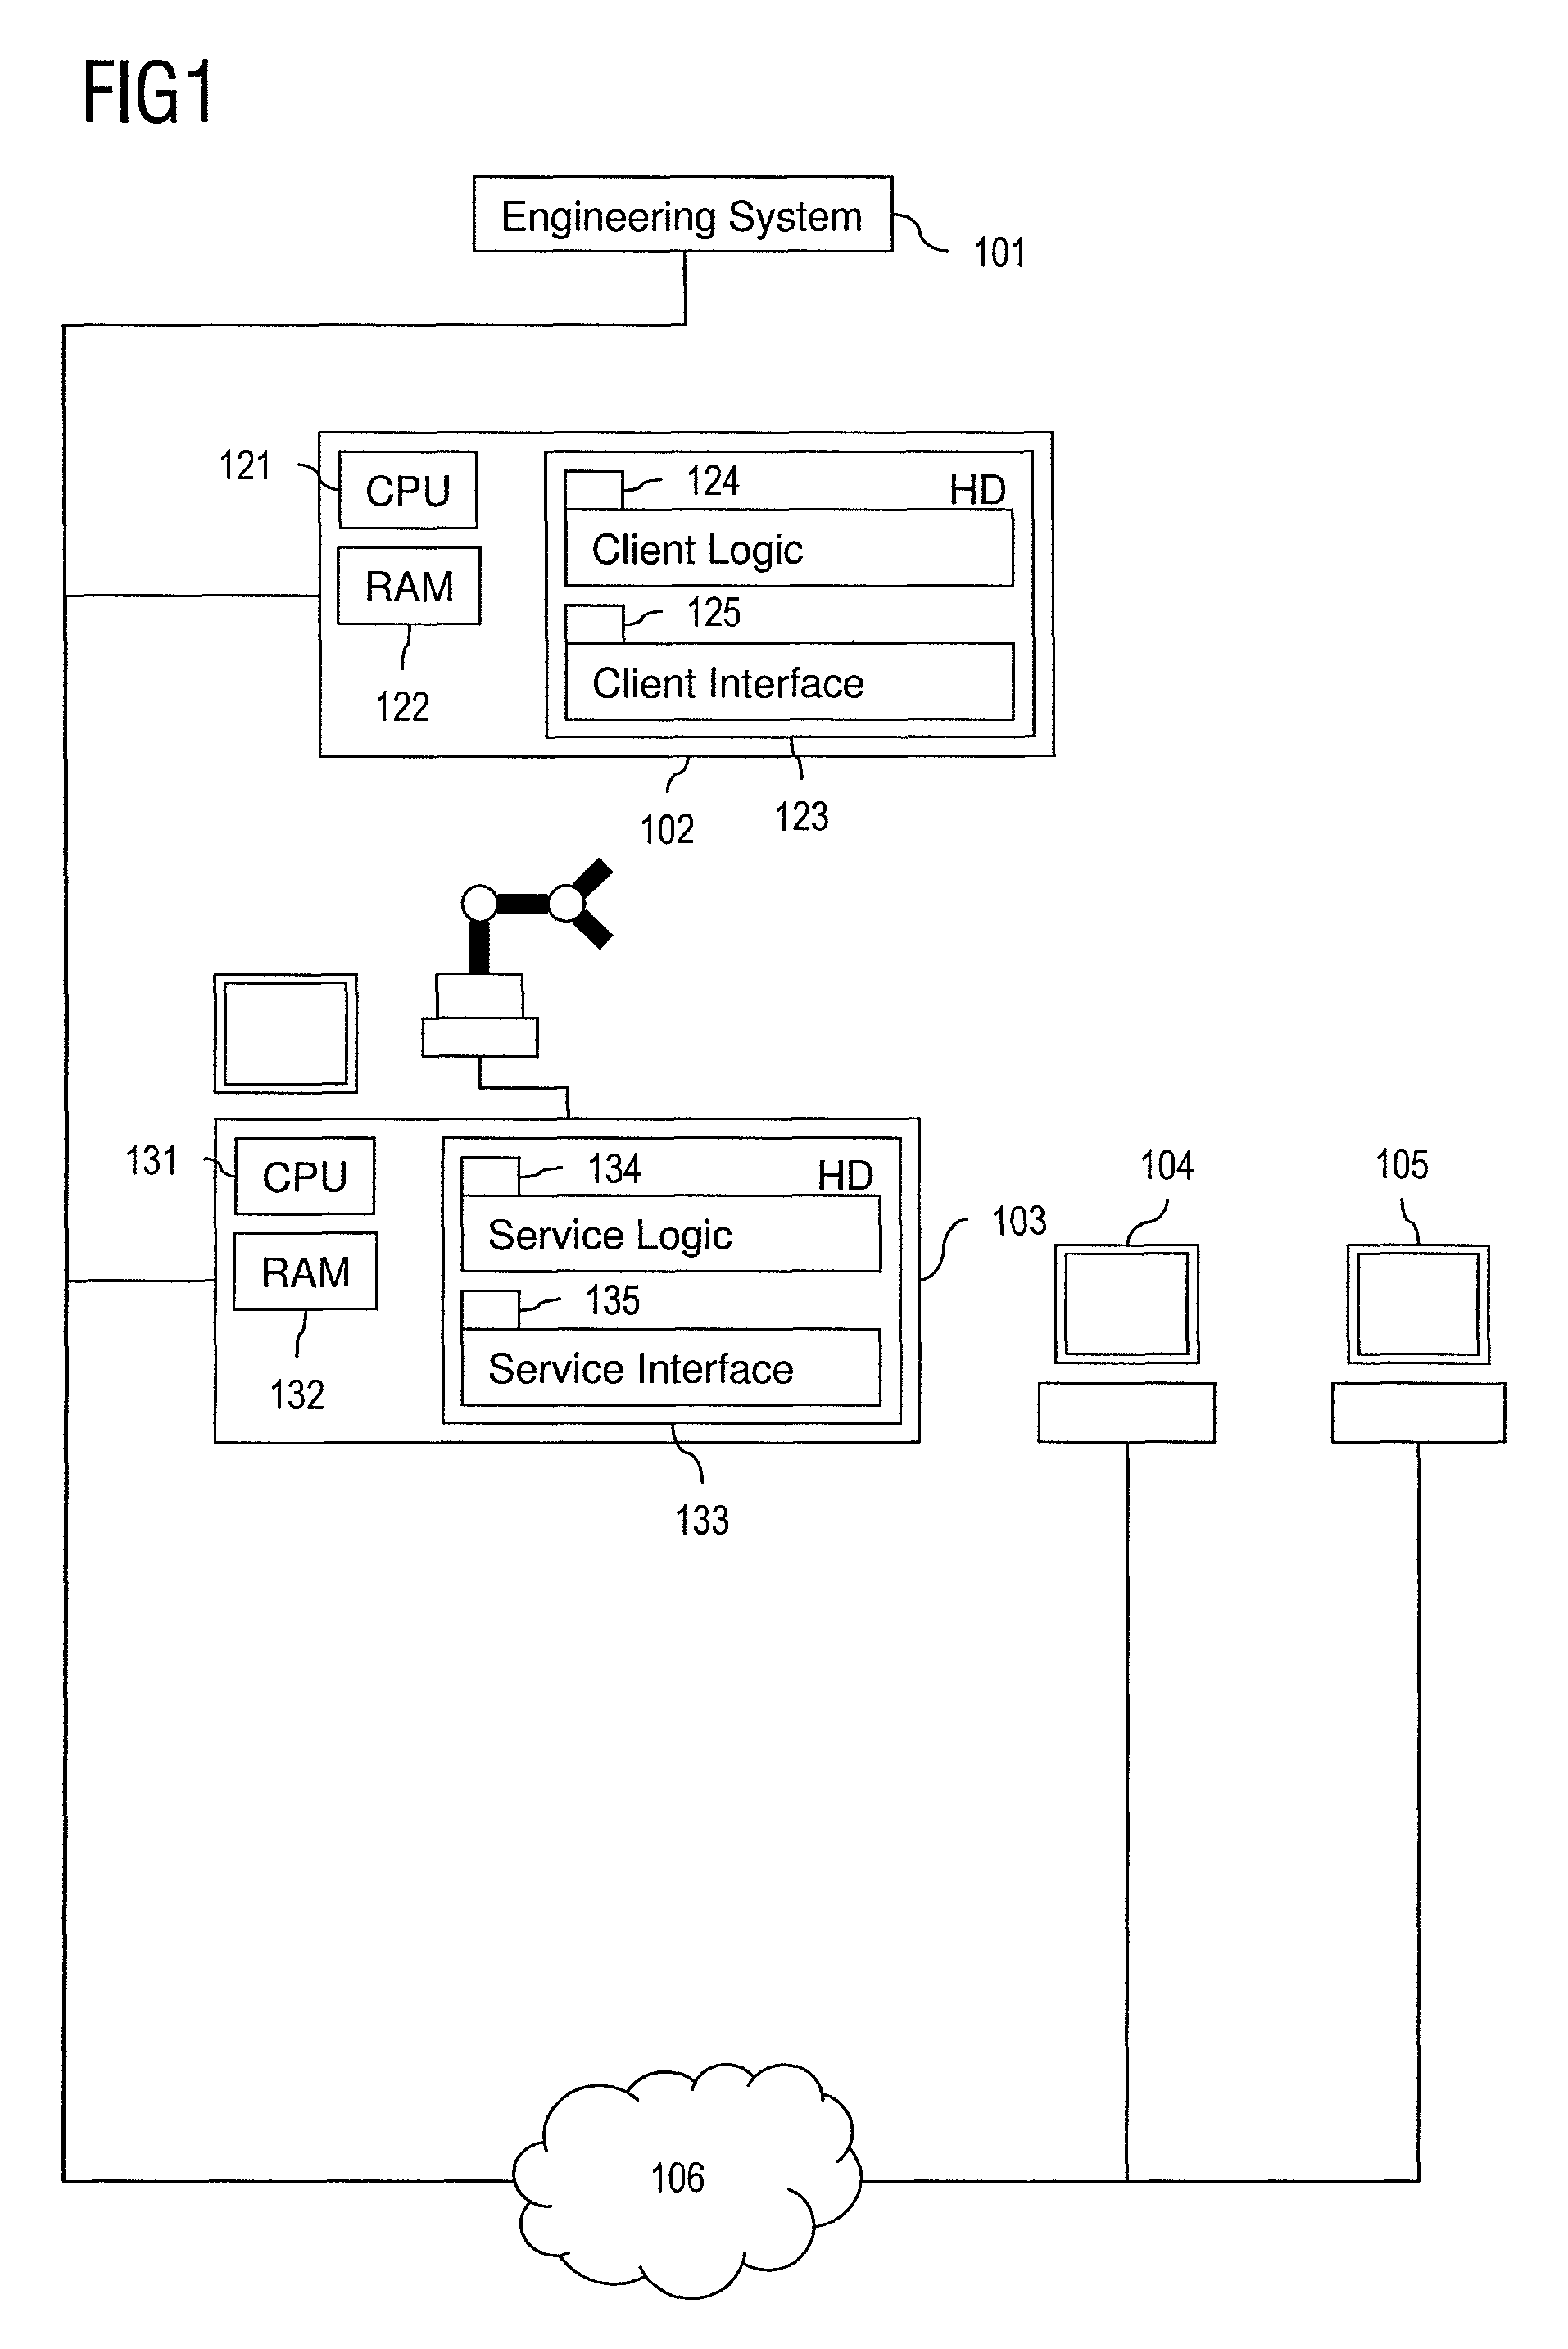 Method of providing data access in an industrial automation system, computer program product and industrial automation system